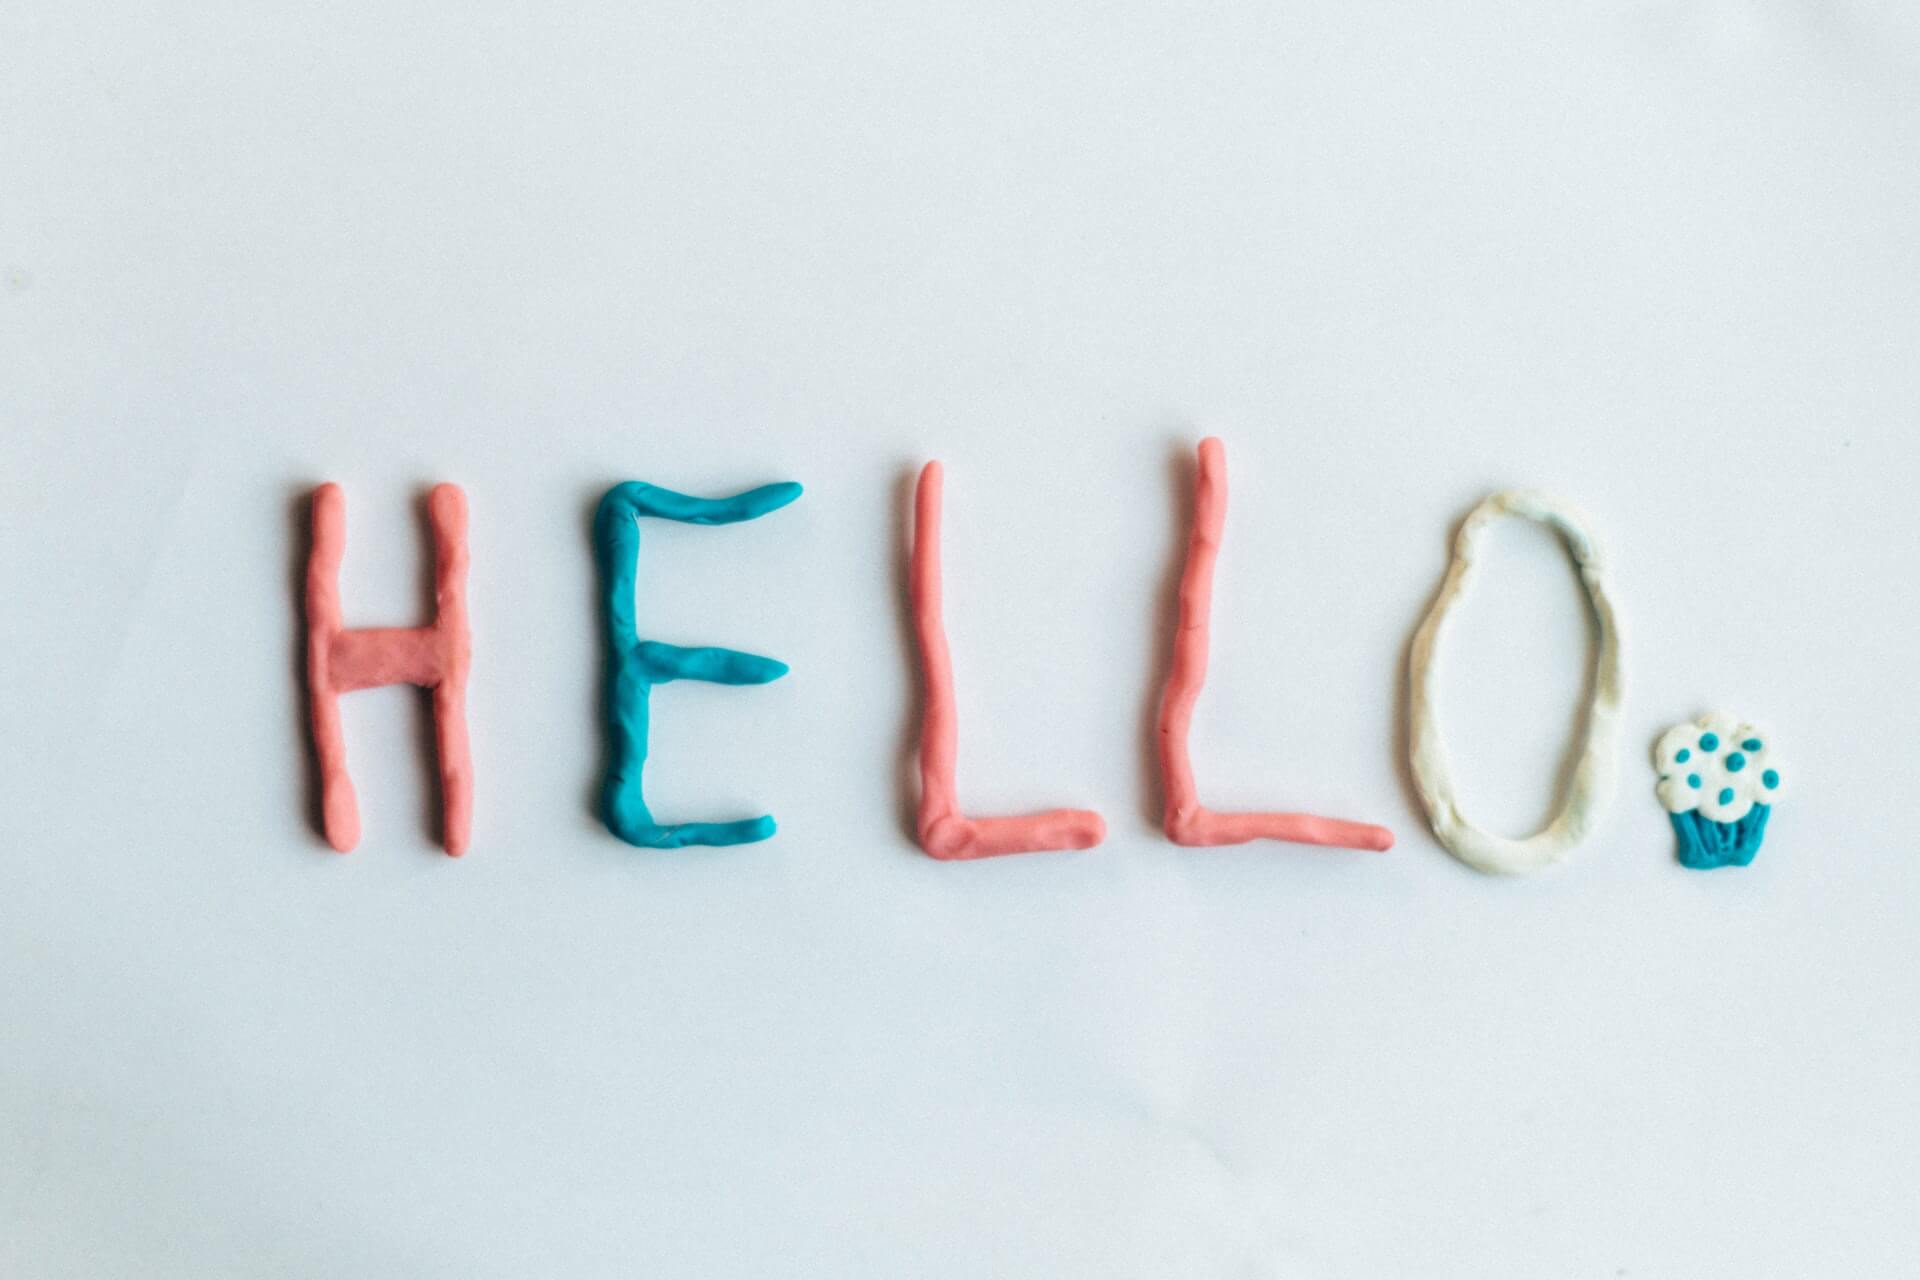 The word "hello" is written with colored clay